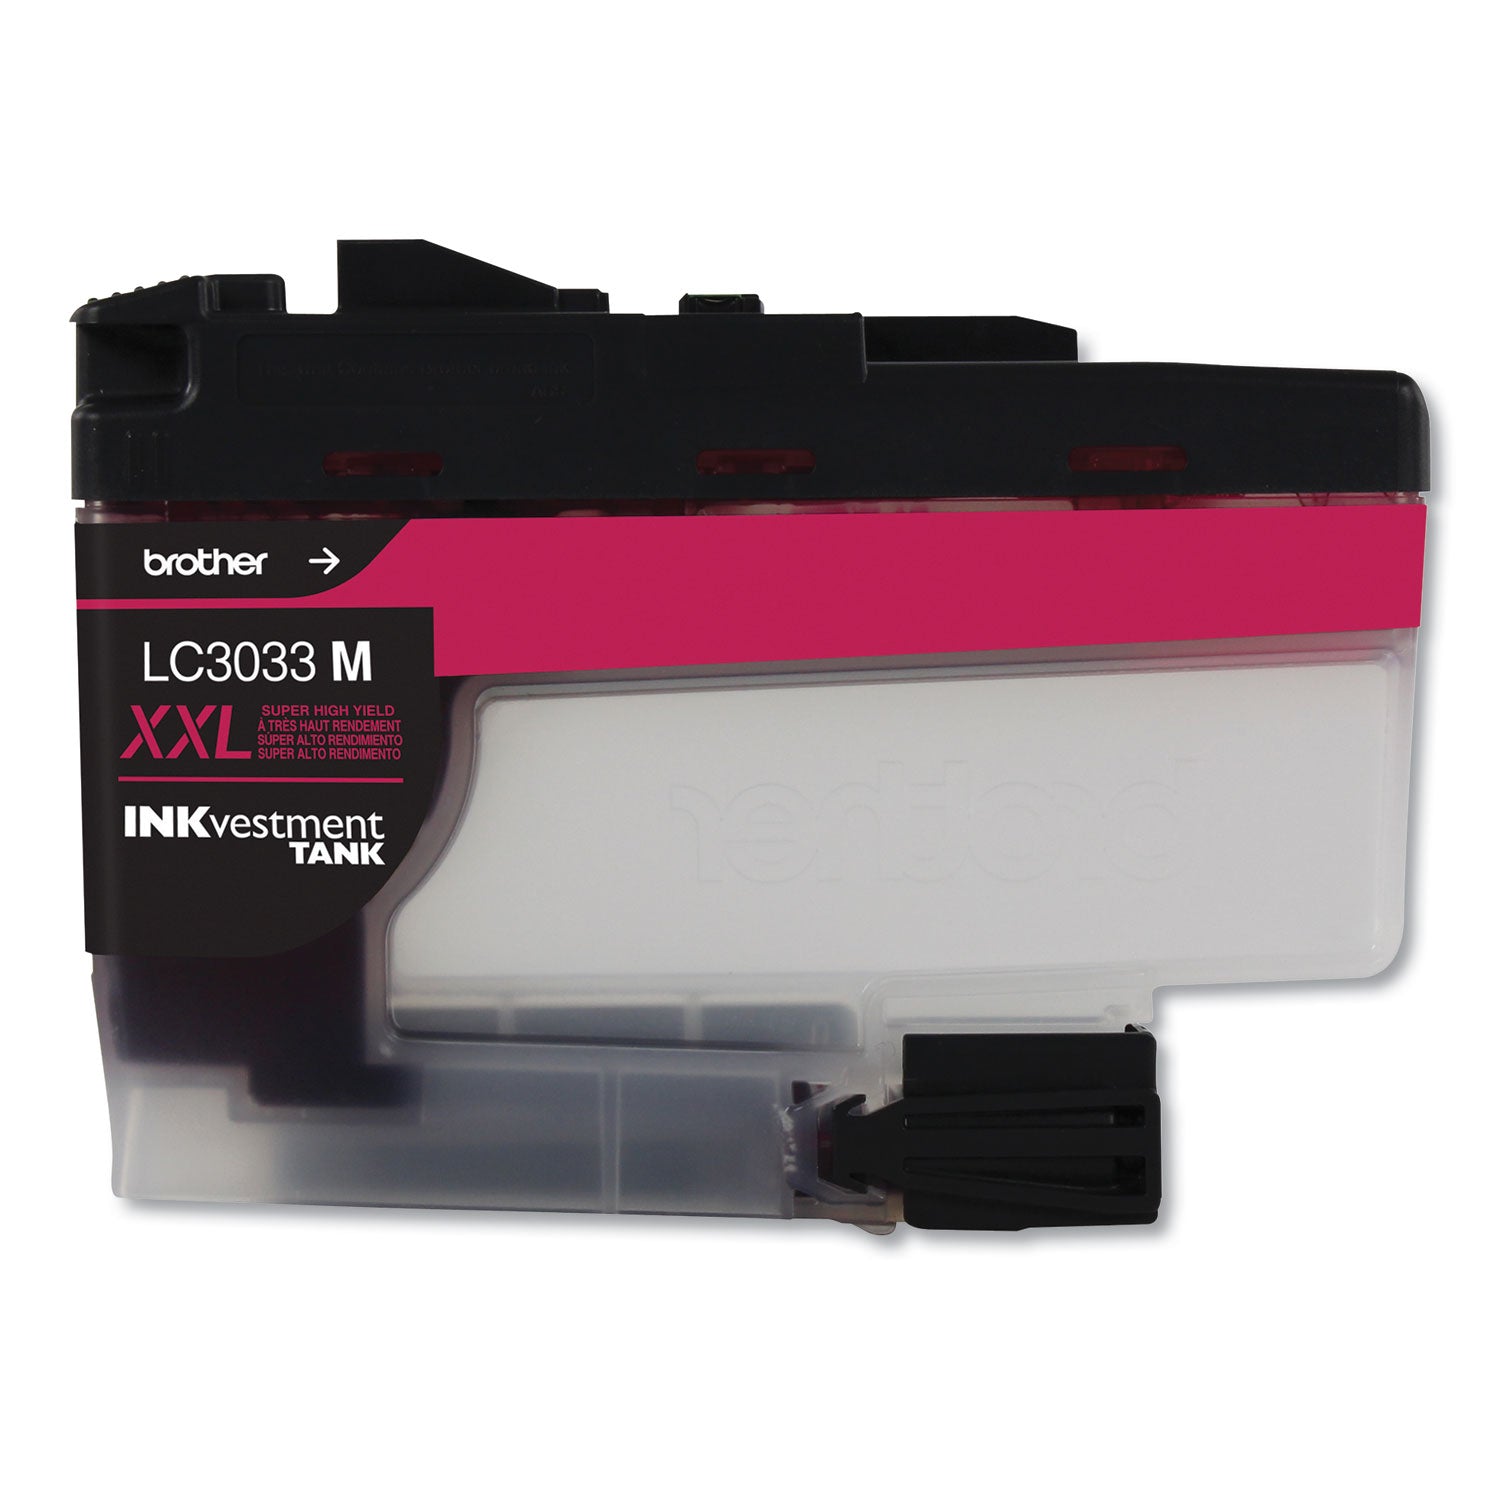 lc3033m-inkvestment-super-high-yield-ink-1500-page-yield-magenta_brtlc3033m - 2